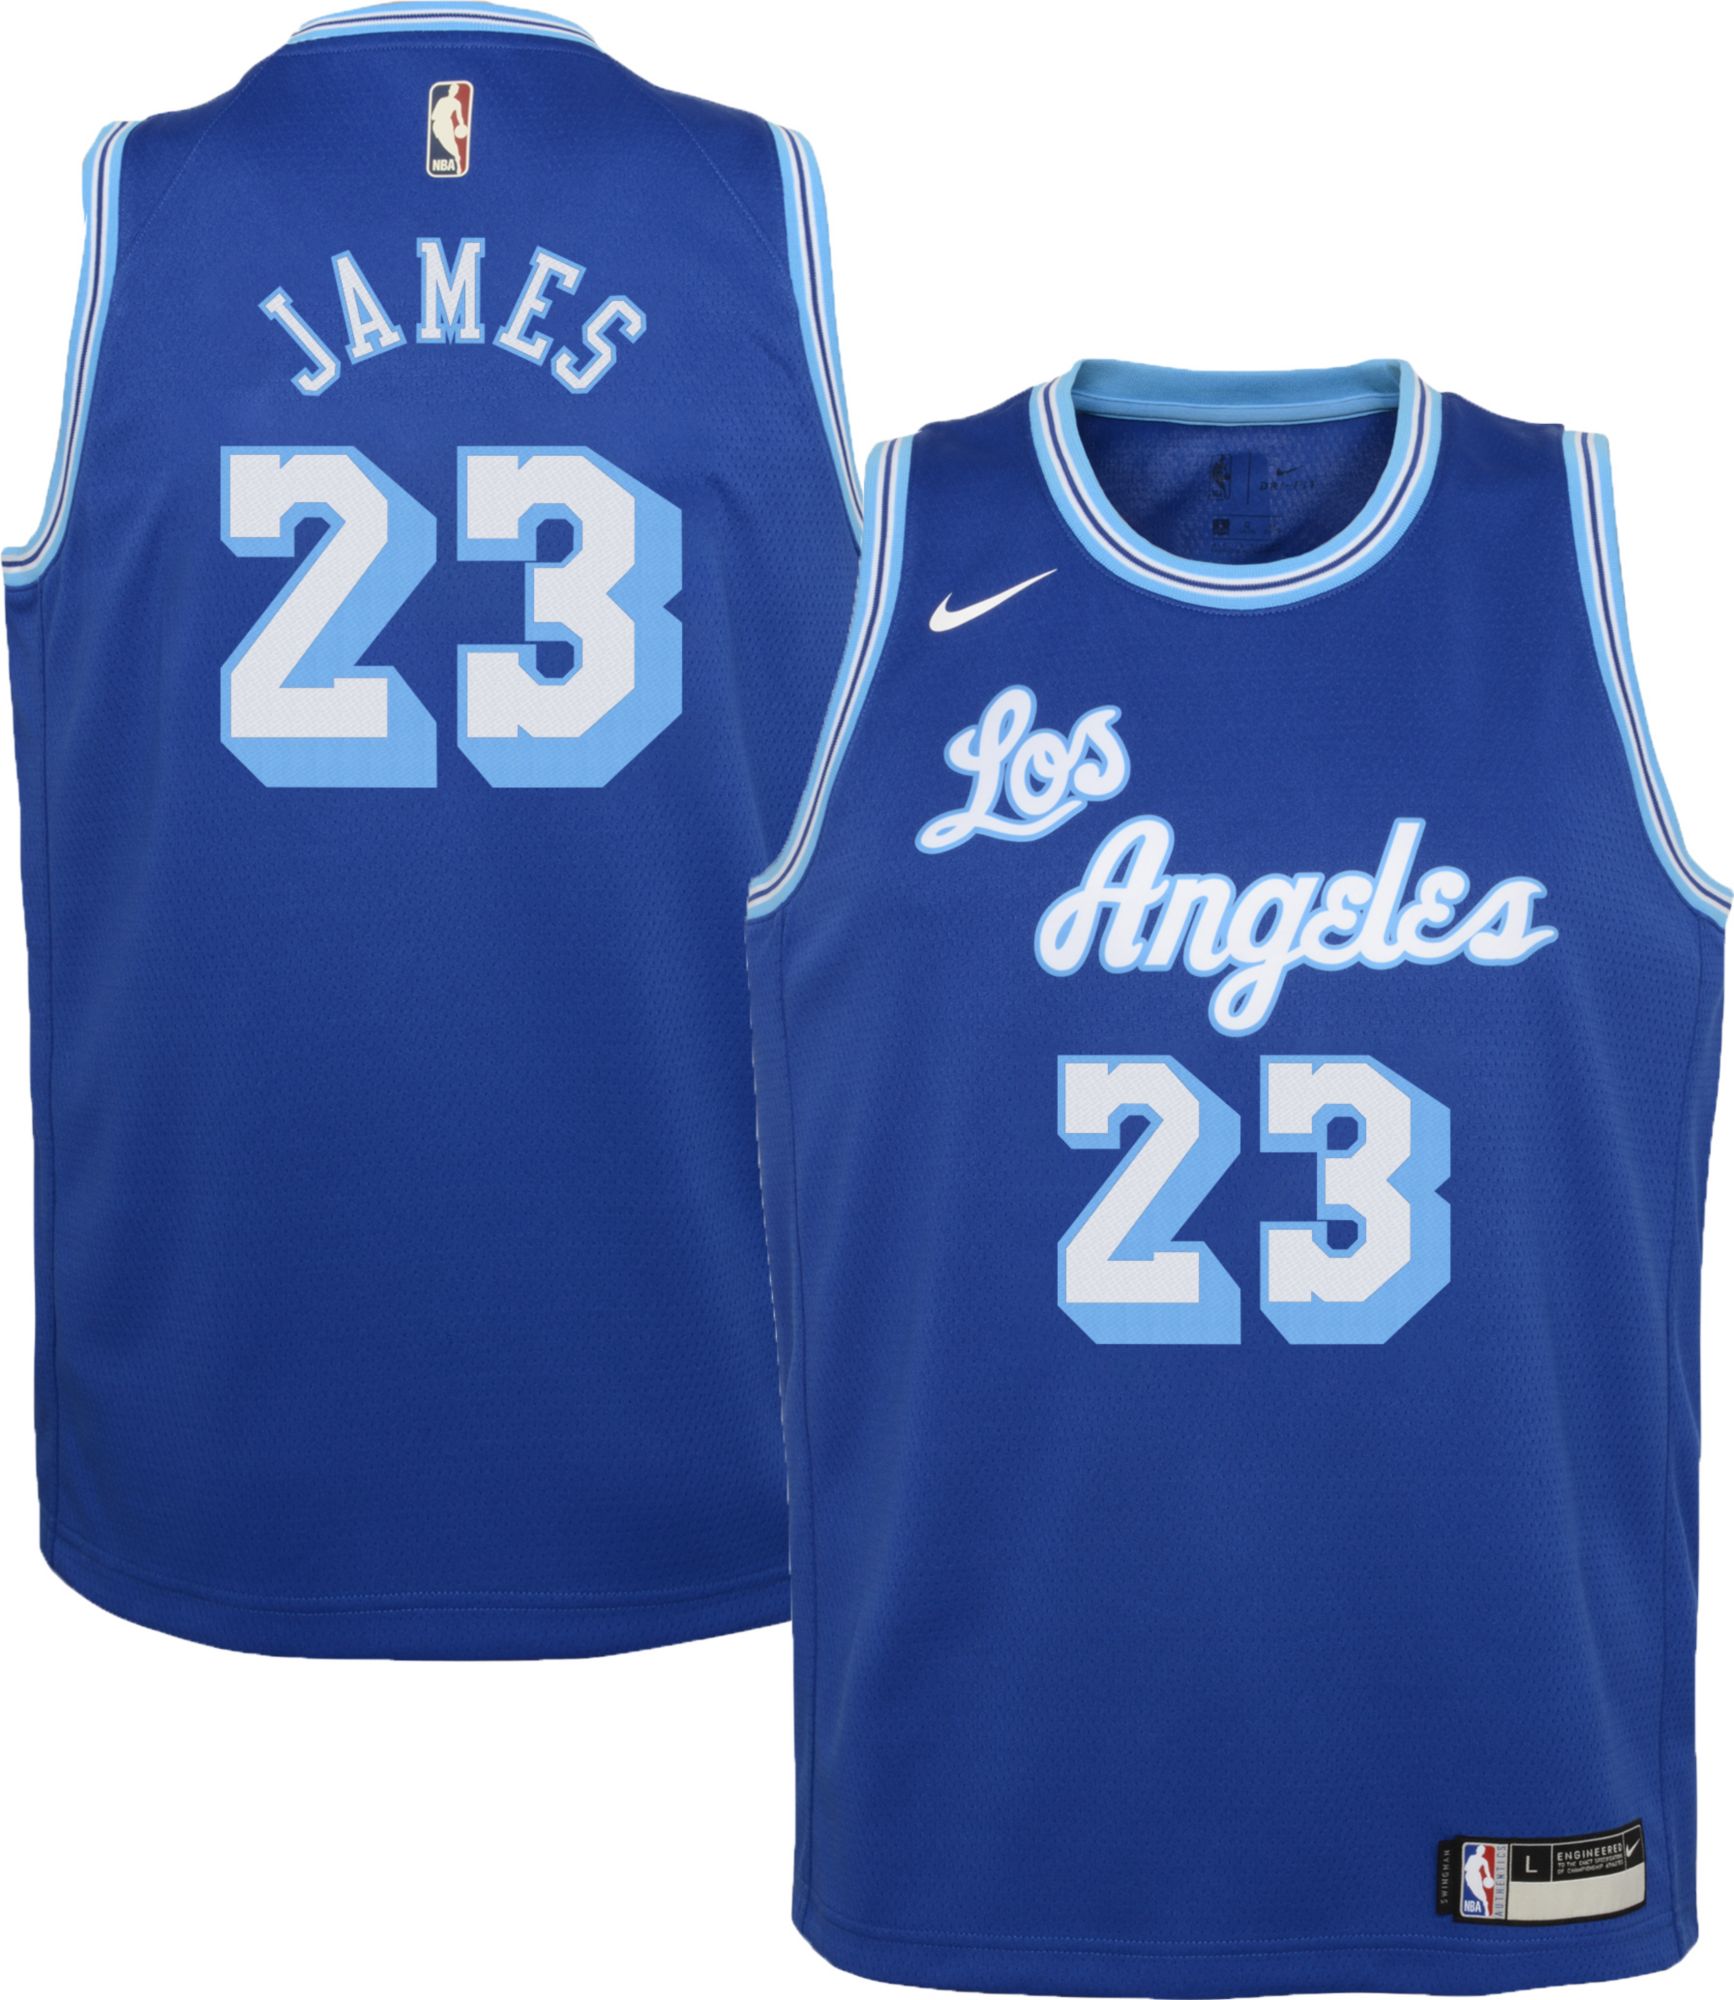 lakers 23 jersey